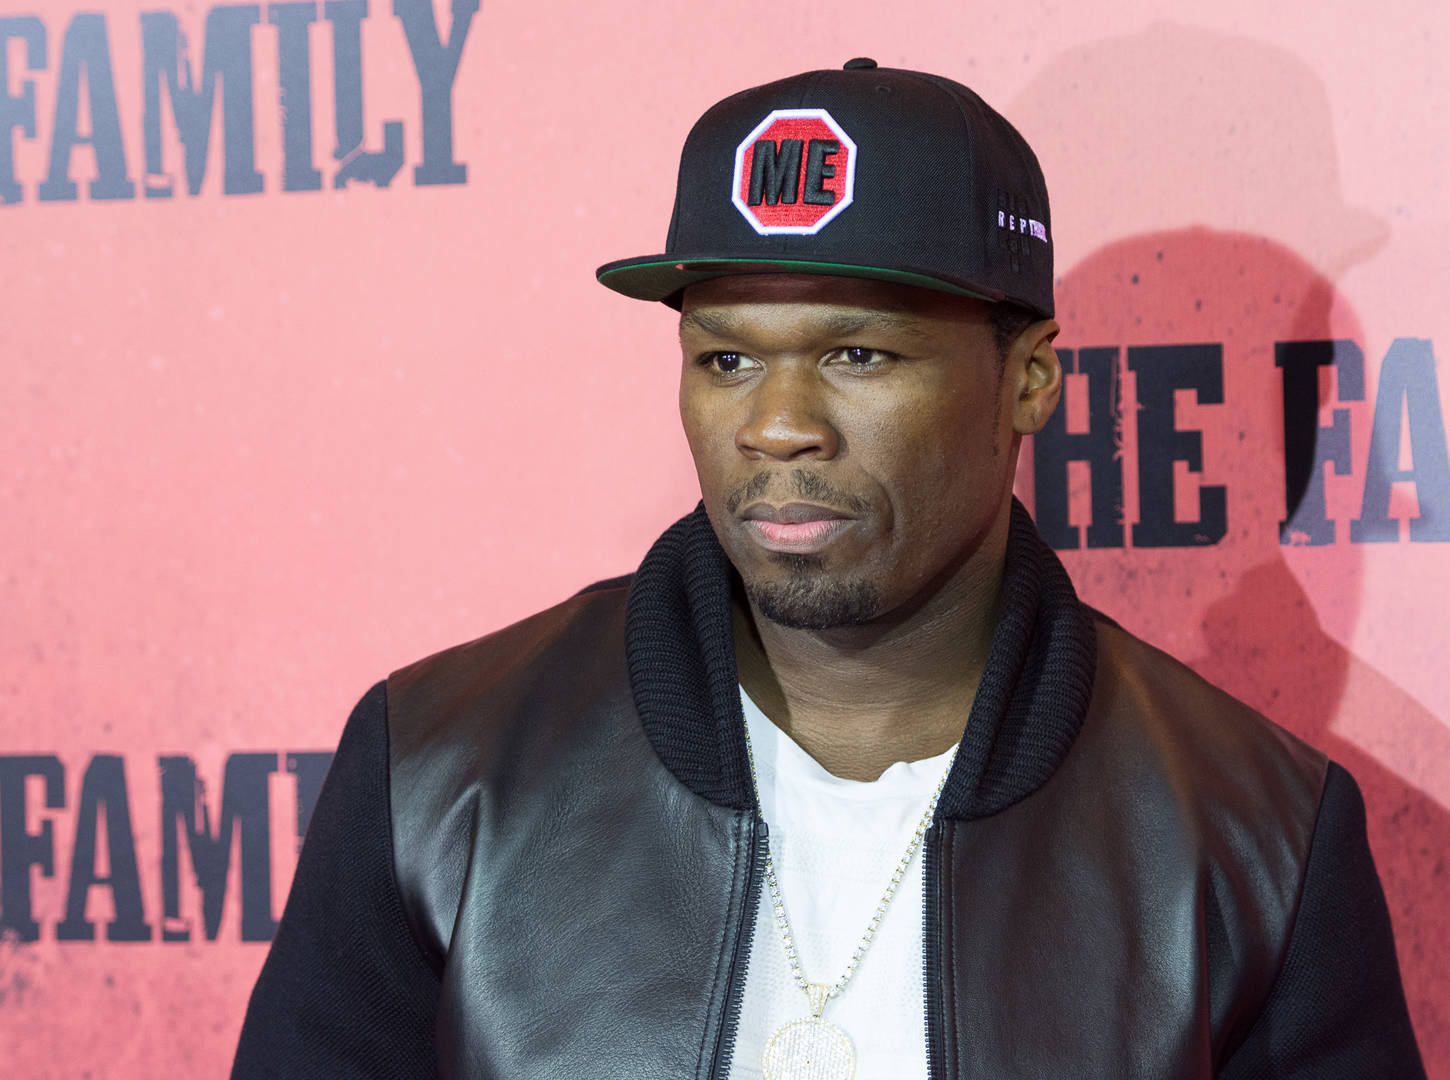 50 Cent Says He'd Take Homicide Charges Over RICO In Resurfaced Clip: Watch 27